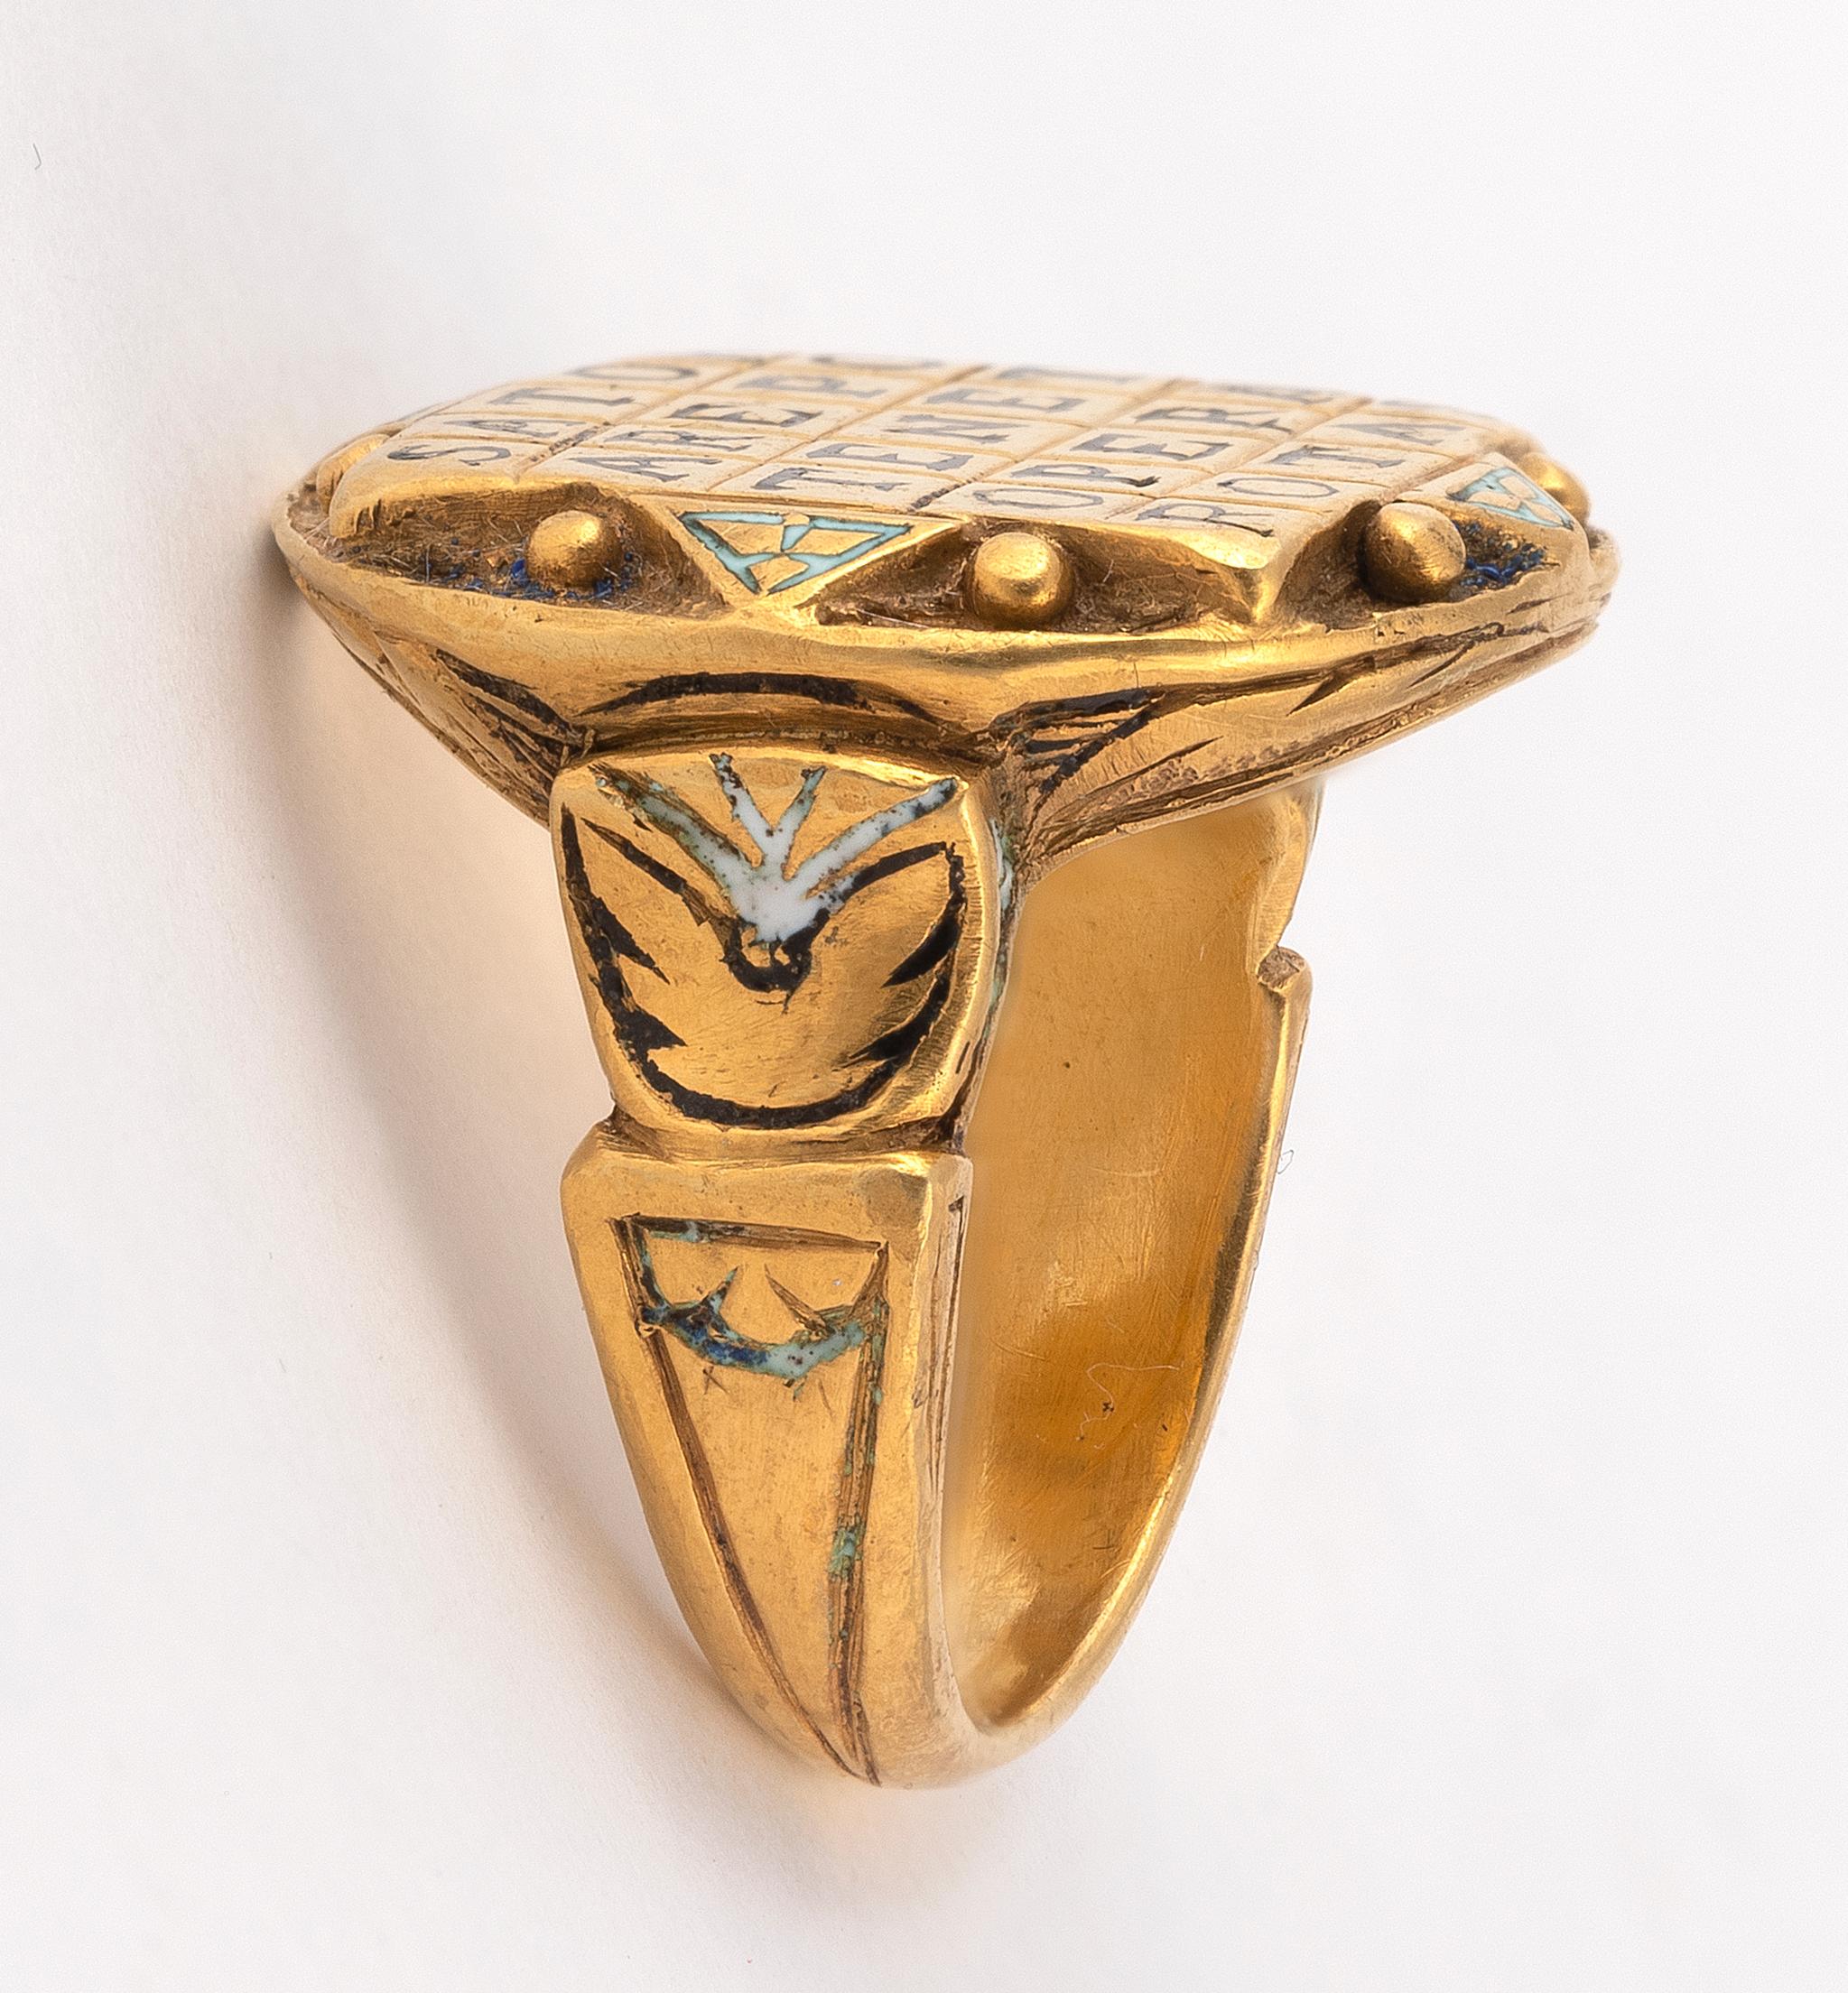 Antique magical ring with intaglio the Sator Square (or Rotas Square) is a two-dimensional word square containing a five-word Latin palindrome. It features in early Christian as well as in magical contexts. The earliest example of the square dates